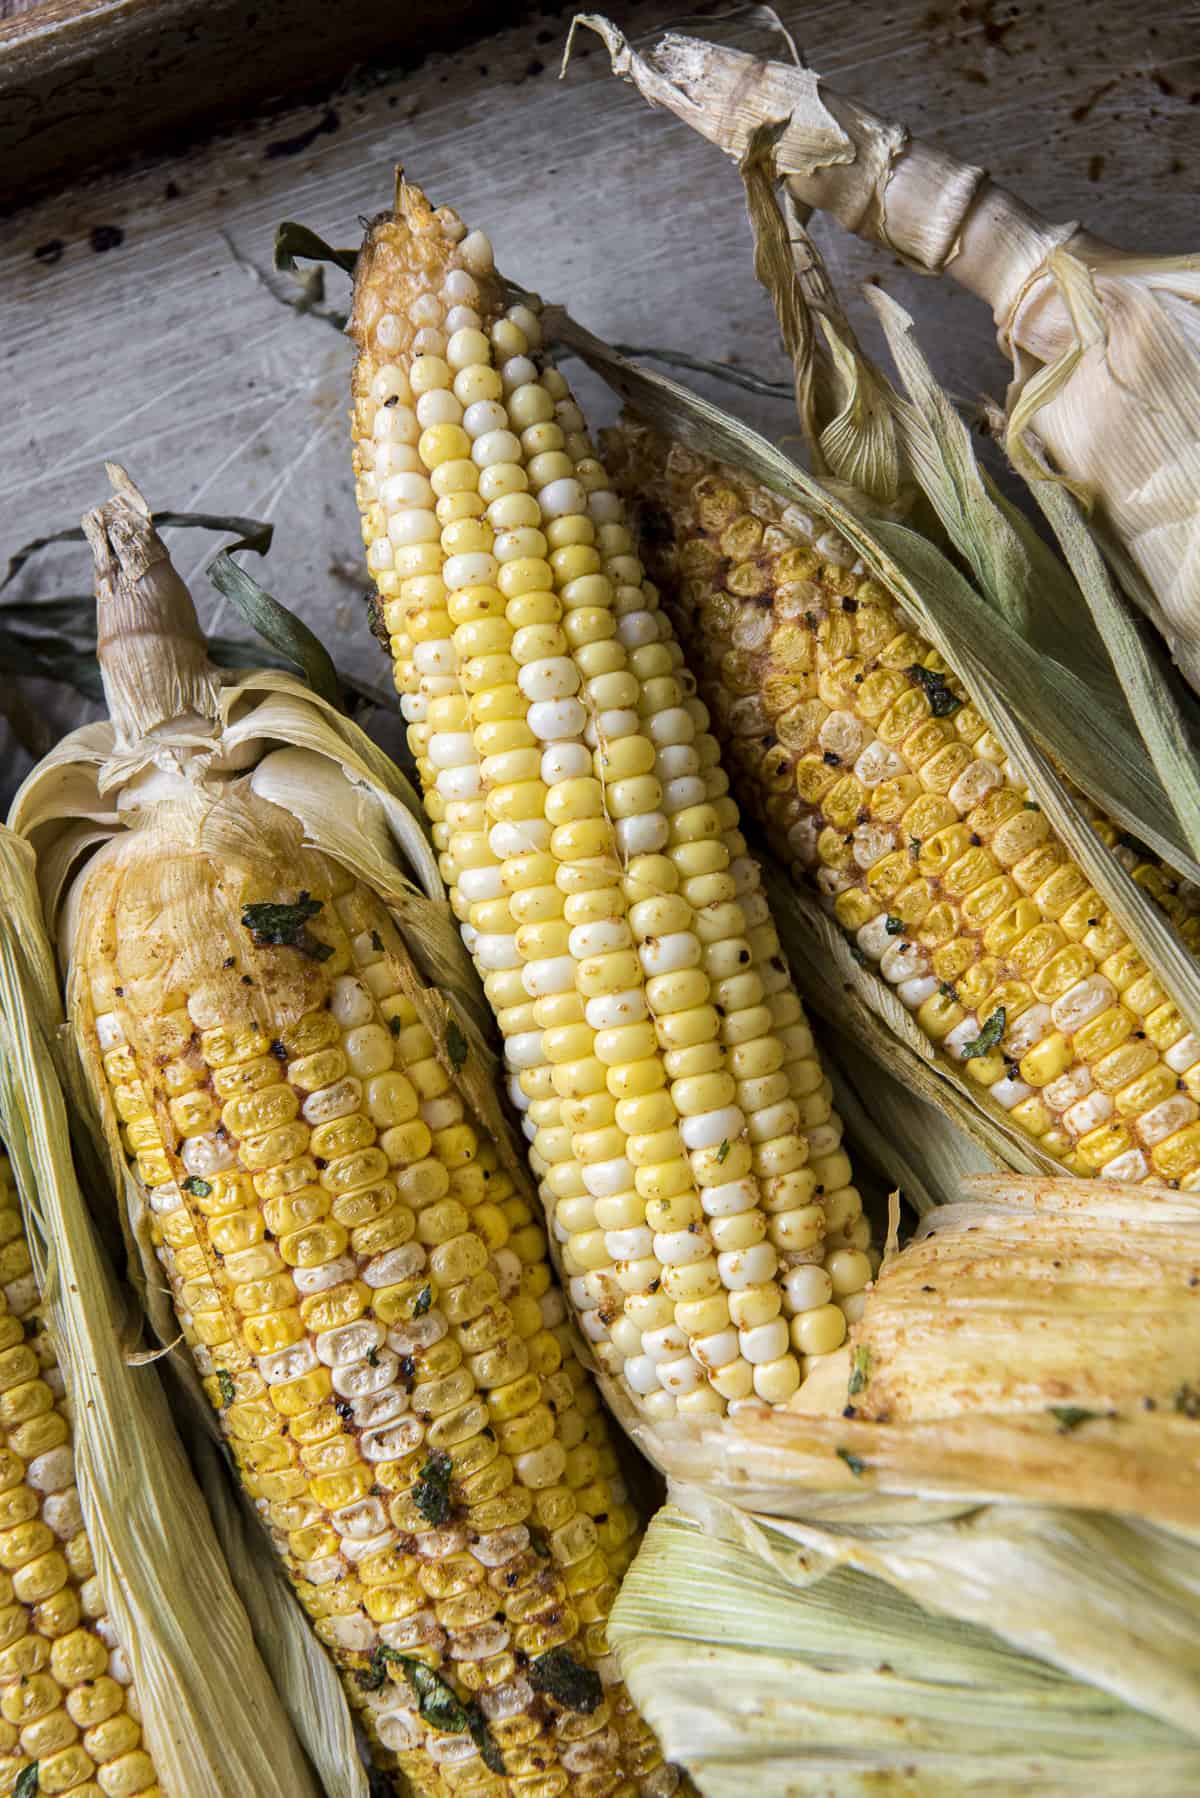 ears of smoked corn on the cob in their husks on a baking sheet